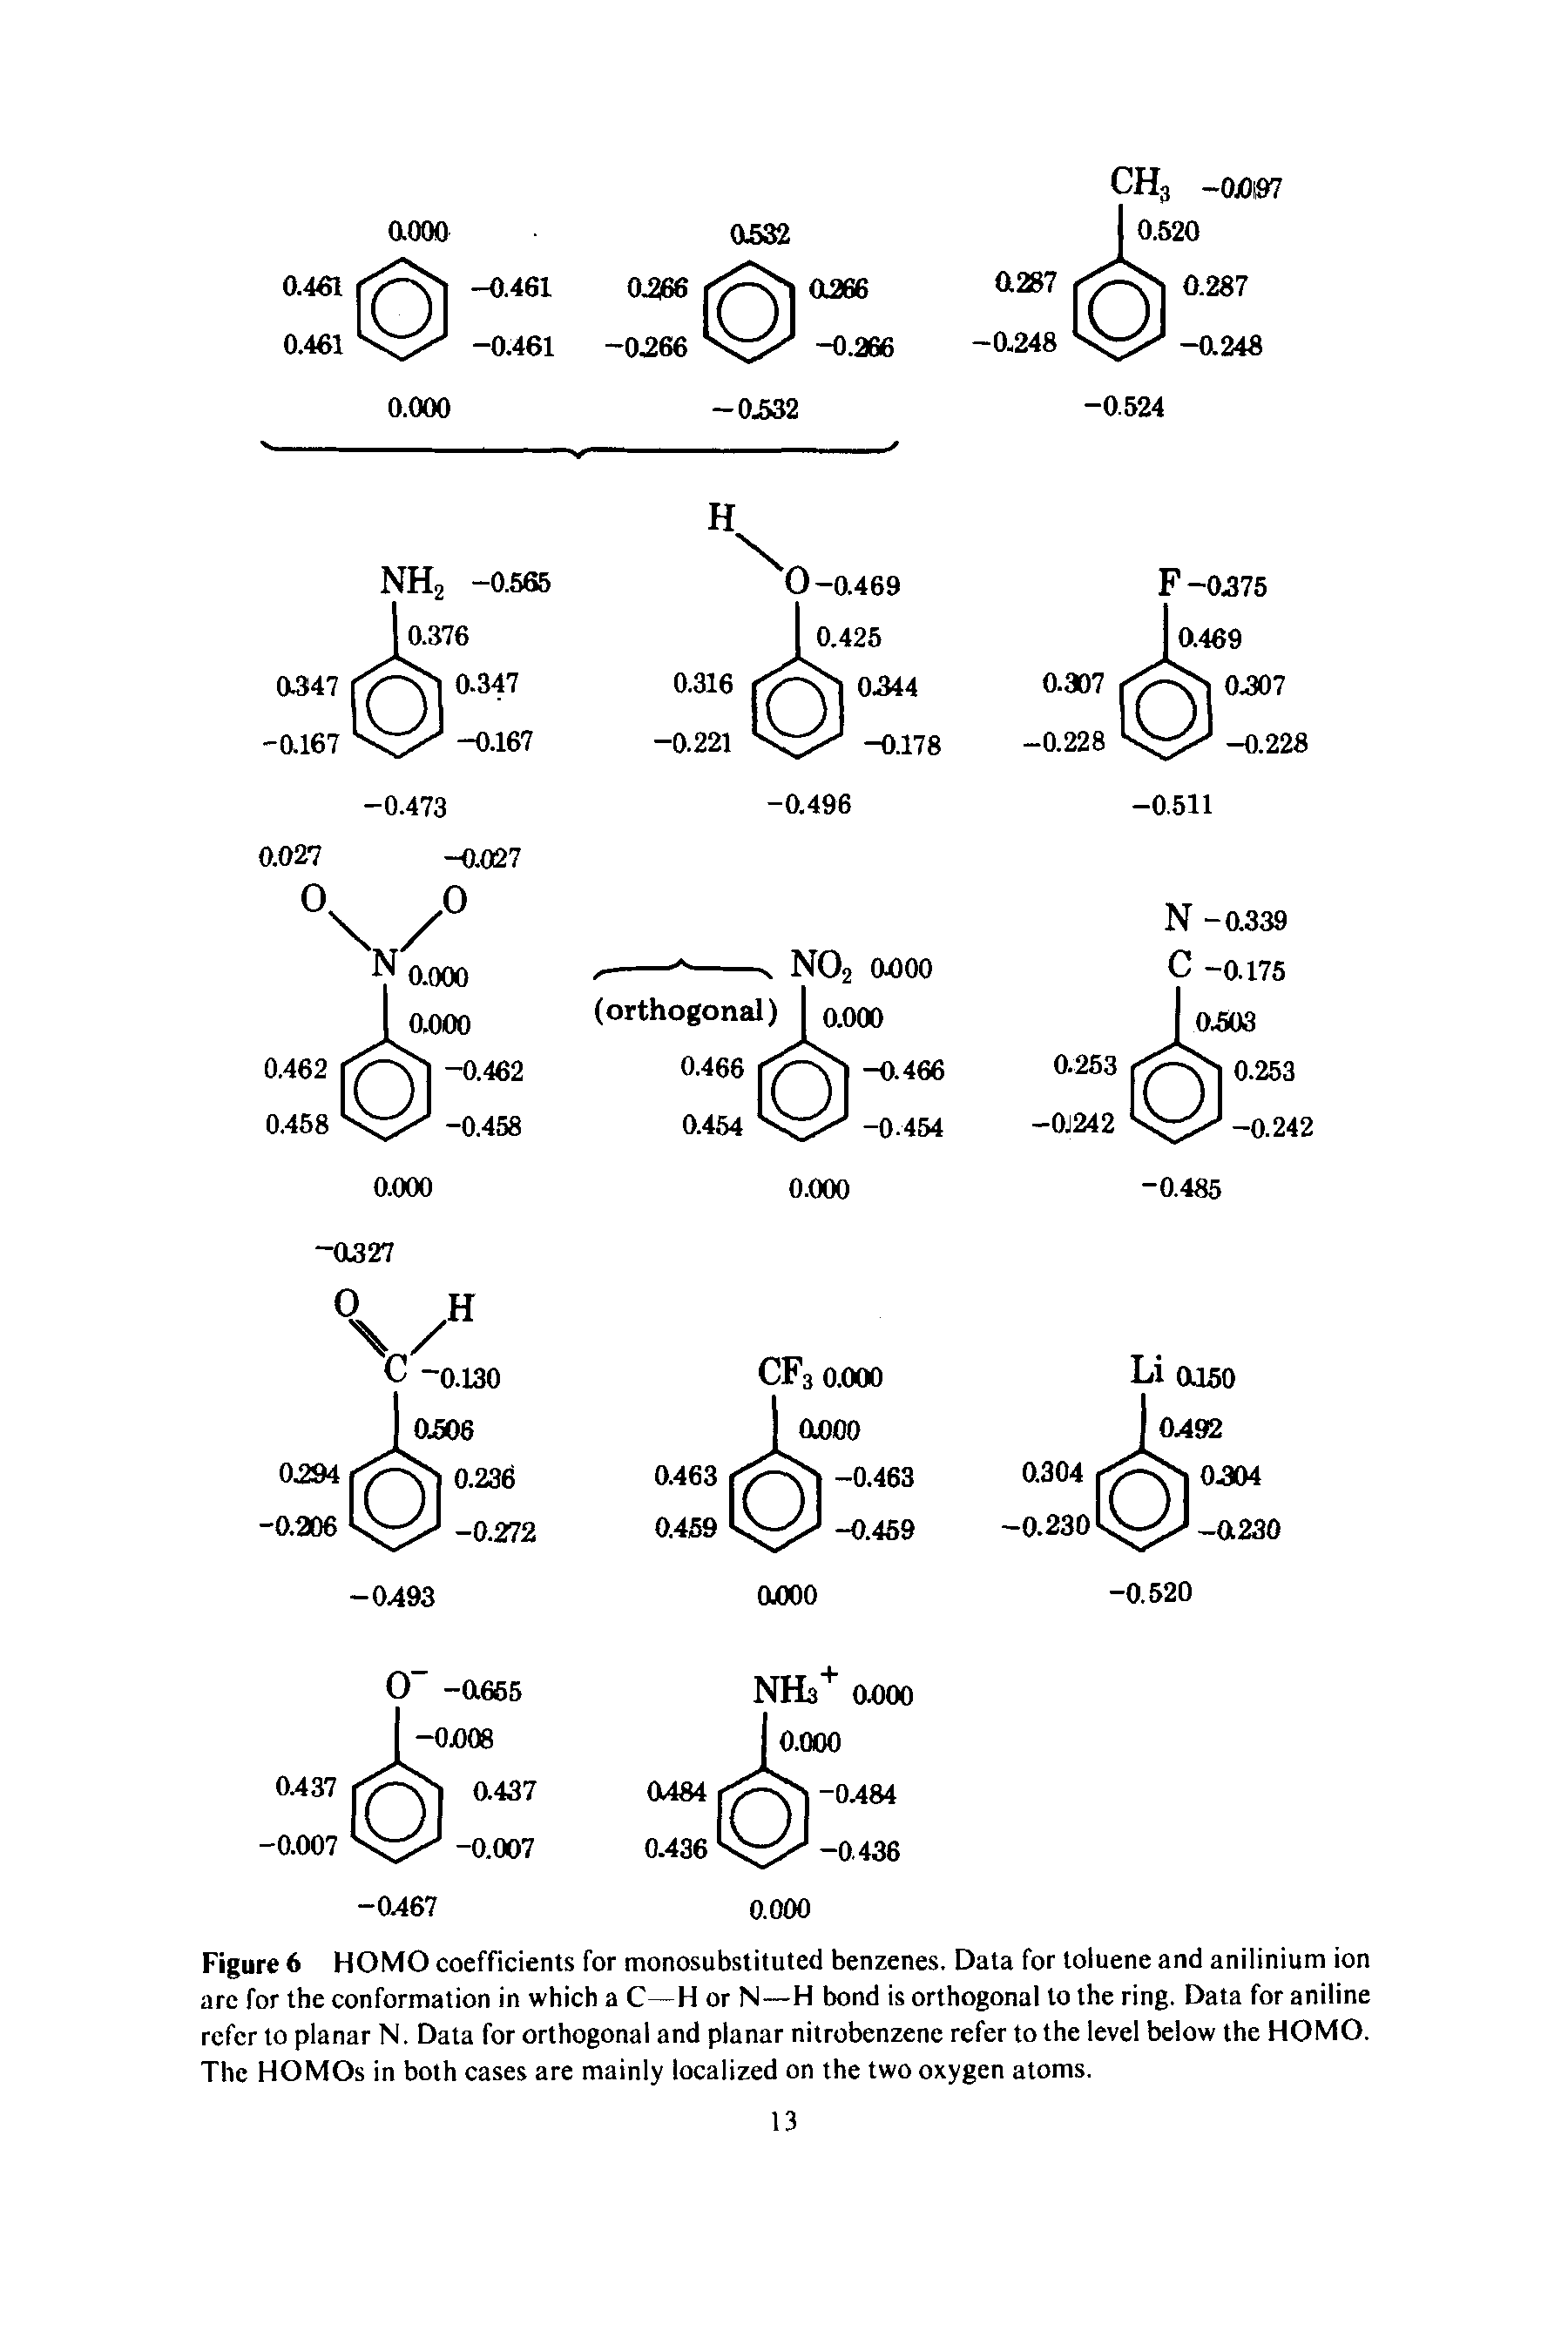 Figure 6 HOMO coefficients for monosubstituted benzenes. Data for toluene and anilinium ion are for the conformation in which a C—H or N—H bond is orthogonal to the ring. Data for aniline refer to planar N. Data for orthogonal and planar nitrobenzene refer to the level below the HOMO. The HOMOs in both cases are mainly localized on the two oxygen atoms.